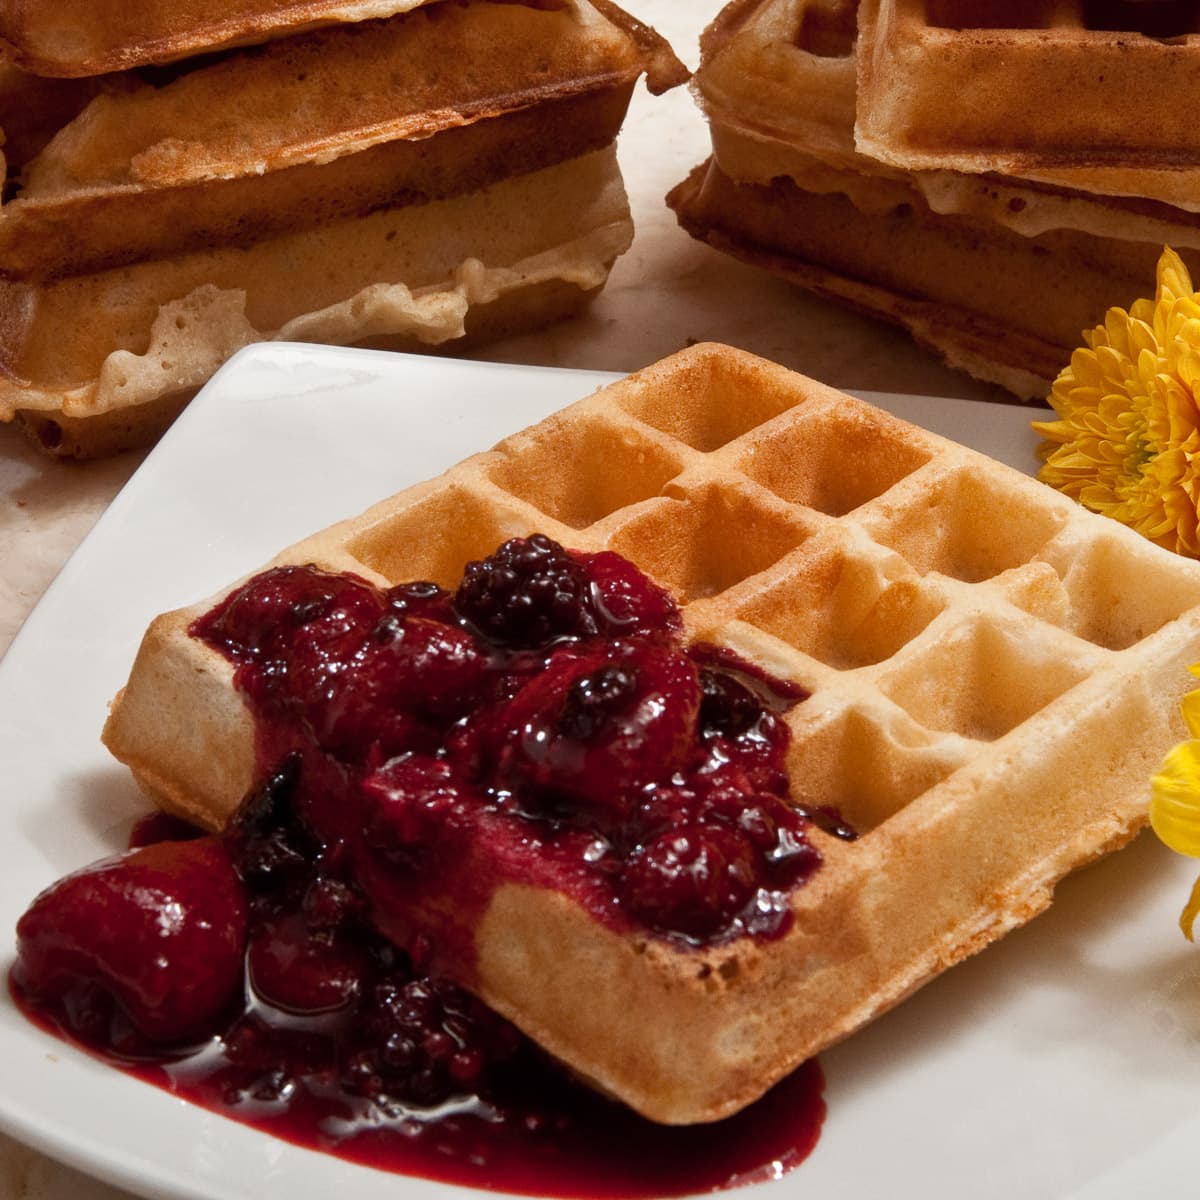 A Belgium waffle on a plate with a fruit compote and stacks of waffles in the background.